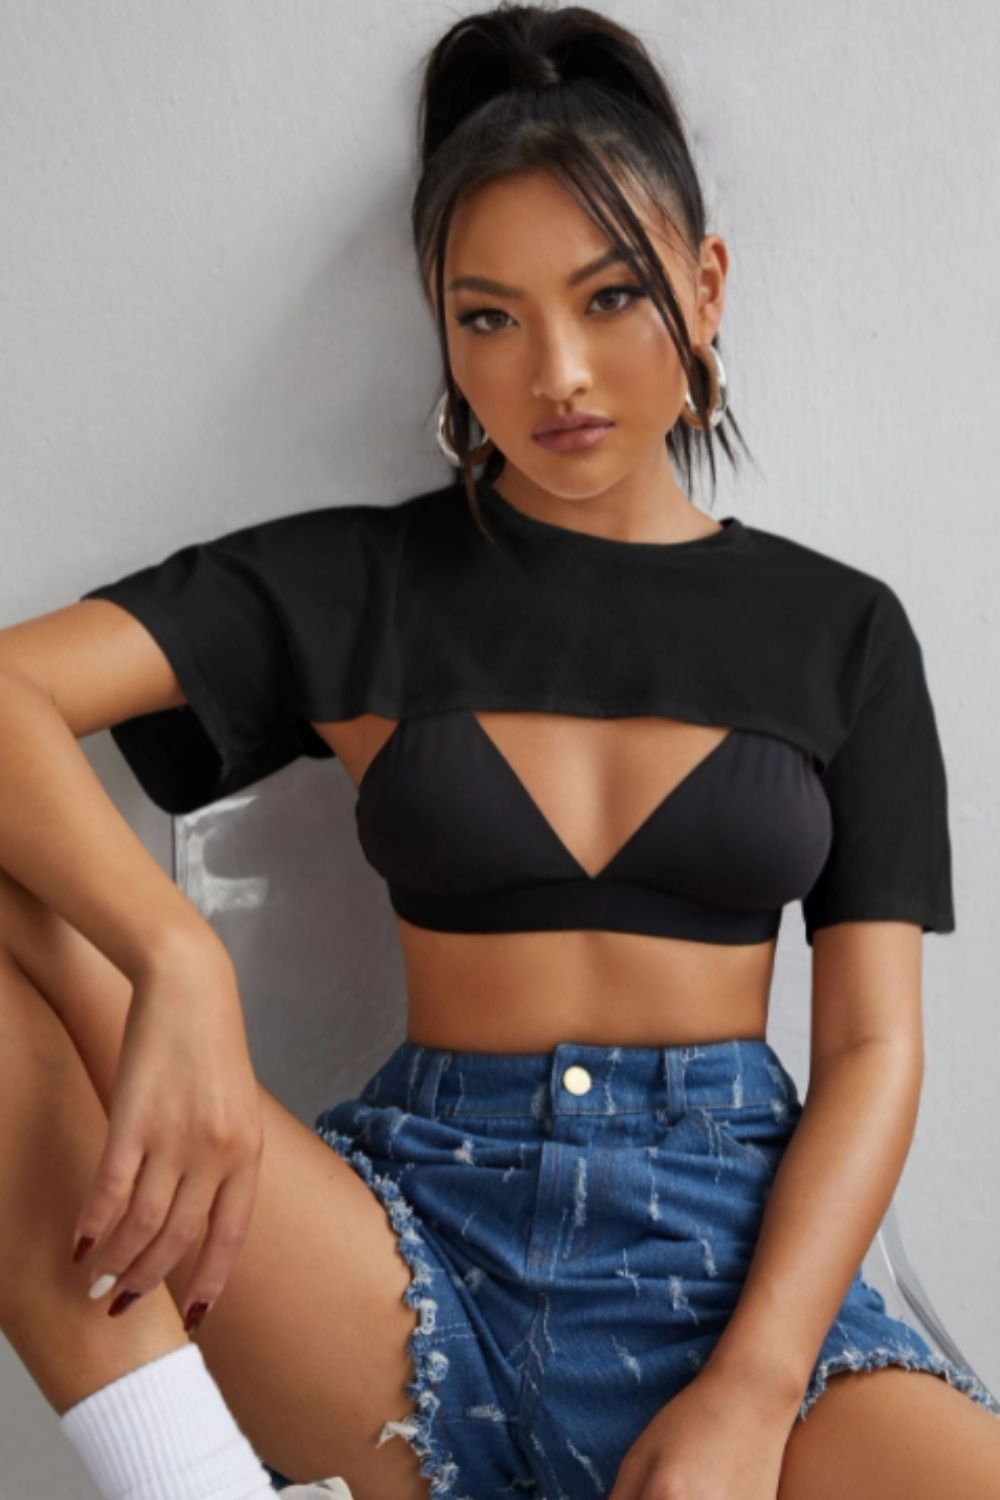 Boxy super crop top without bra – Styched Fashion